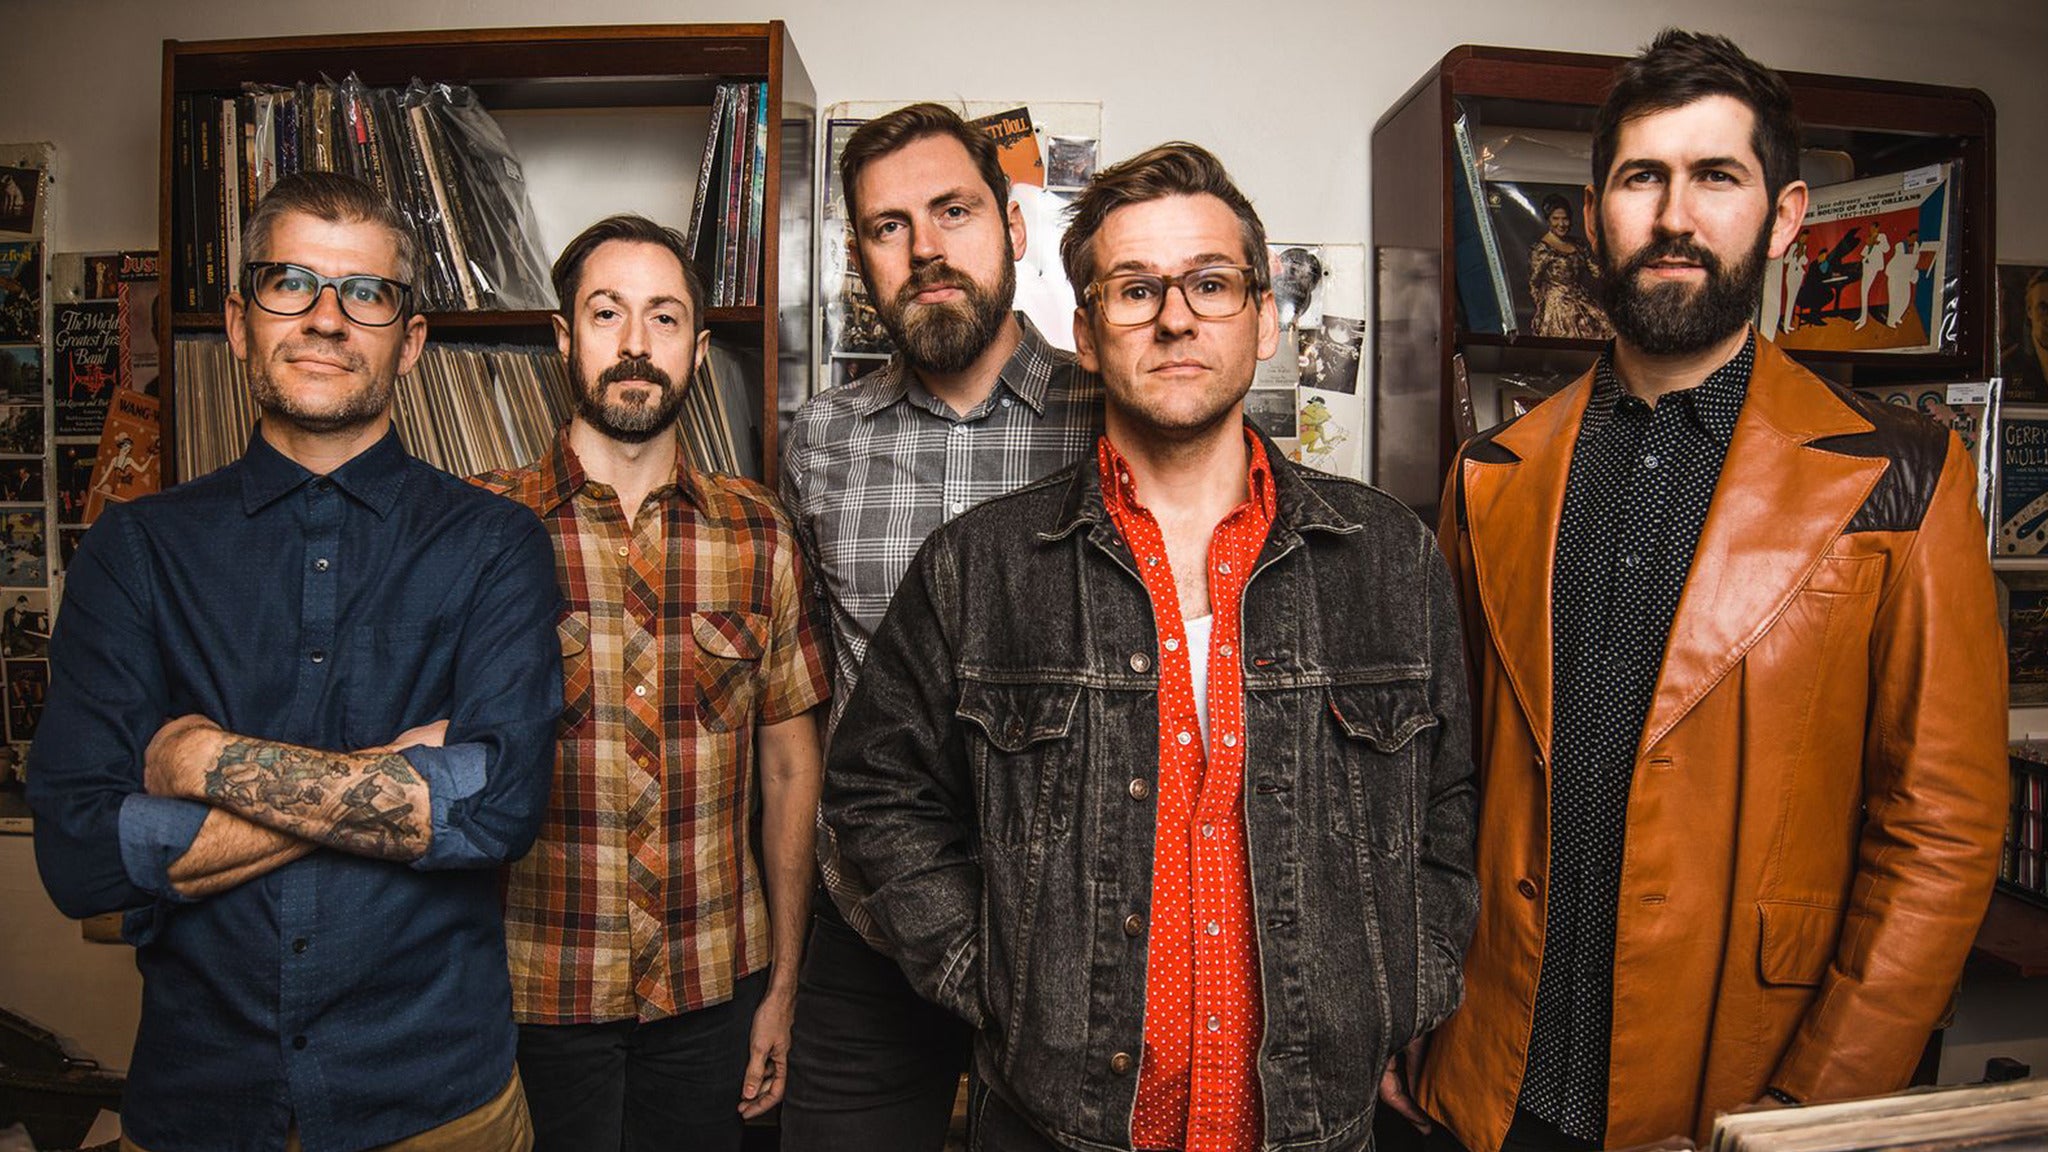 The Steel Wheels in Raleigh promo photo for PineCone Member Access presale offer code